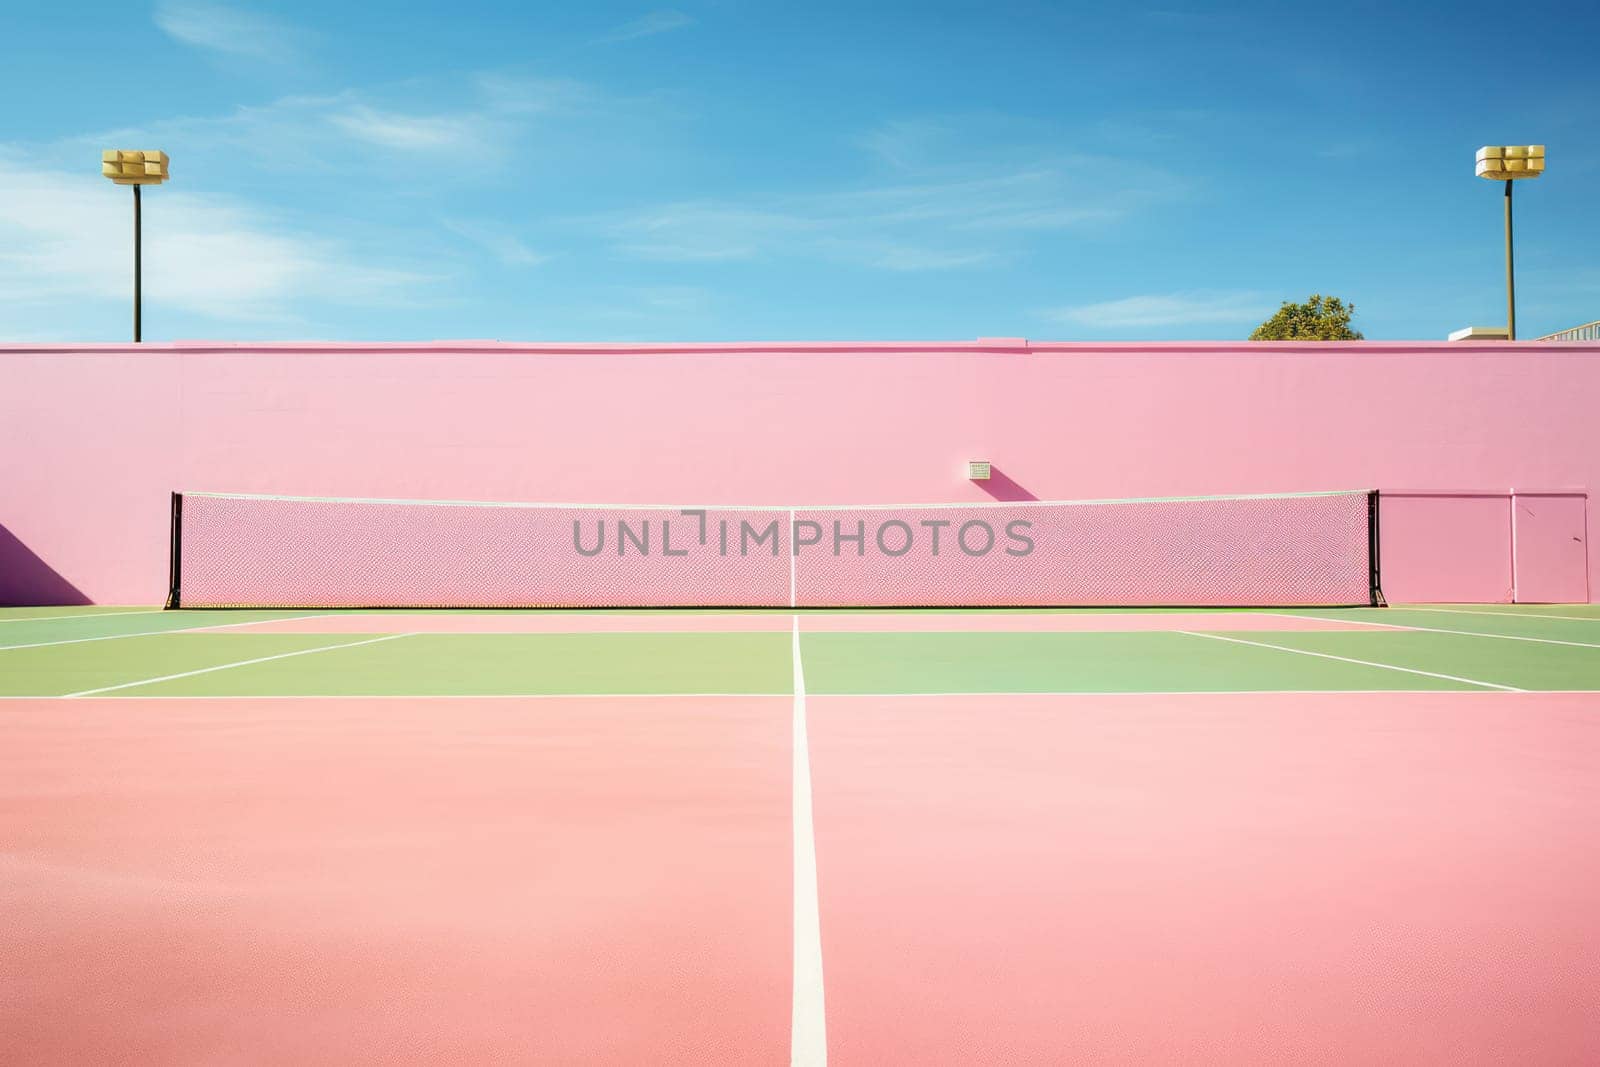 Active leisure in nature: Professional tennis match on a clay court with a vibrant red surface, set against a beautiful blue sky and green field. Empty court with players engaged in intense competition, showcasing technique and skill. Tennis equipment, whi by Vichizh